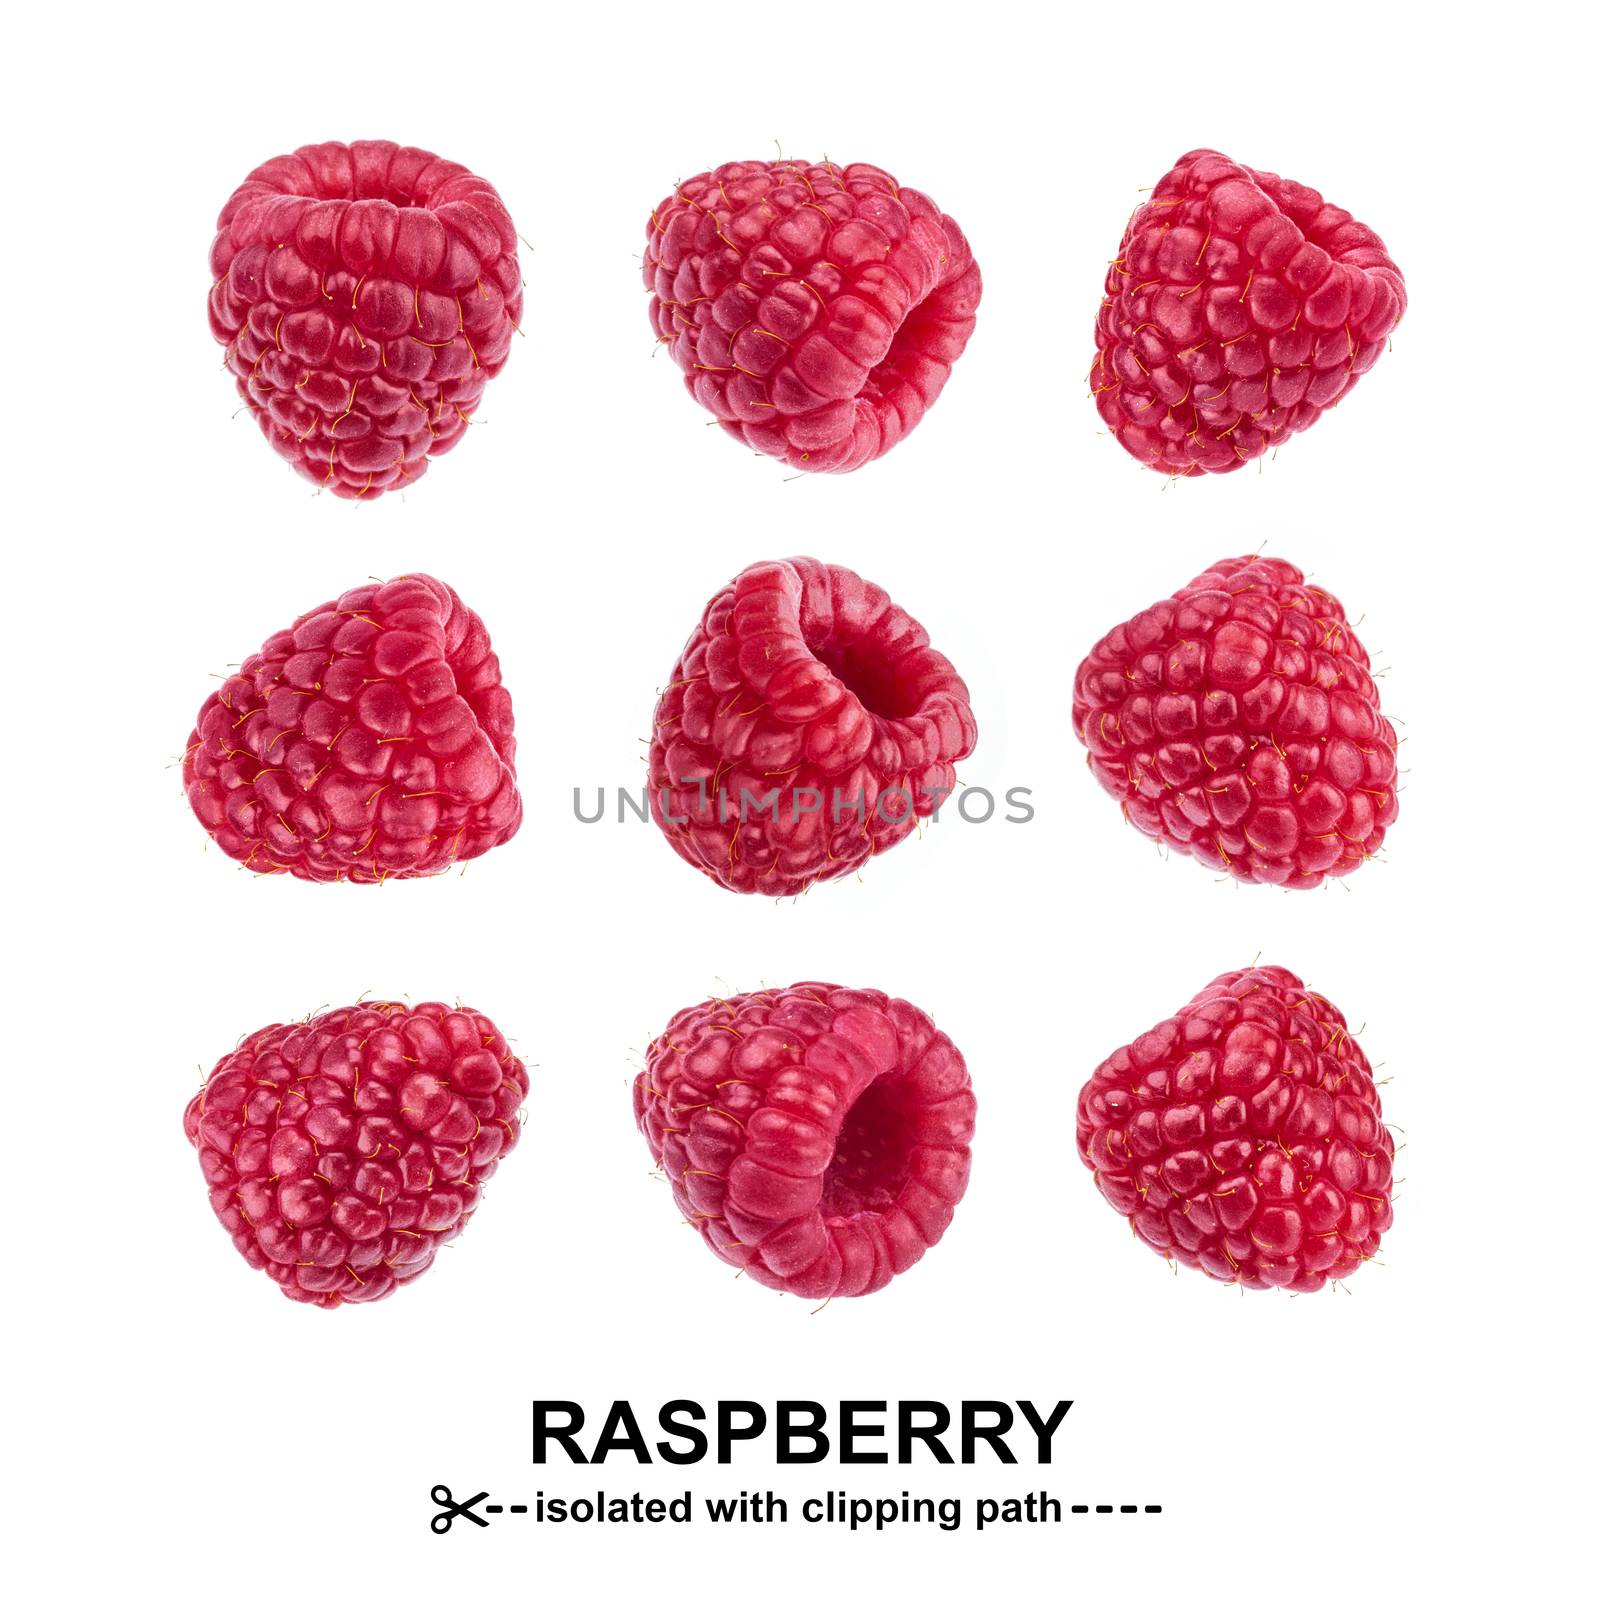 Raspberry collection. Raspberries isolated on white background with clipping path. Seamless Pattern by xamtiw